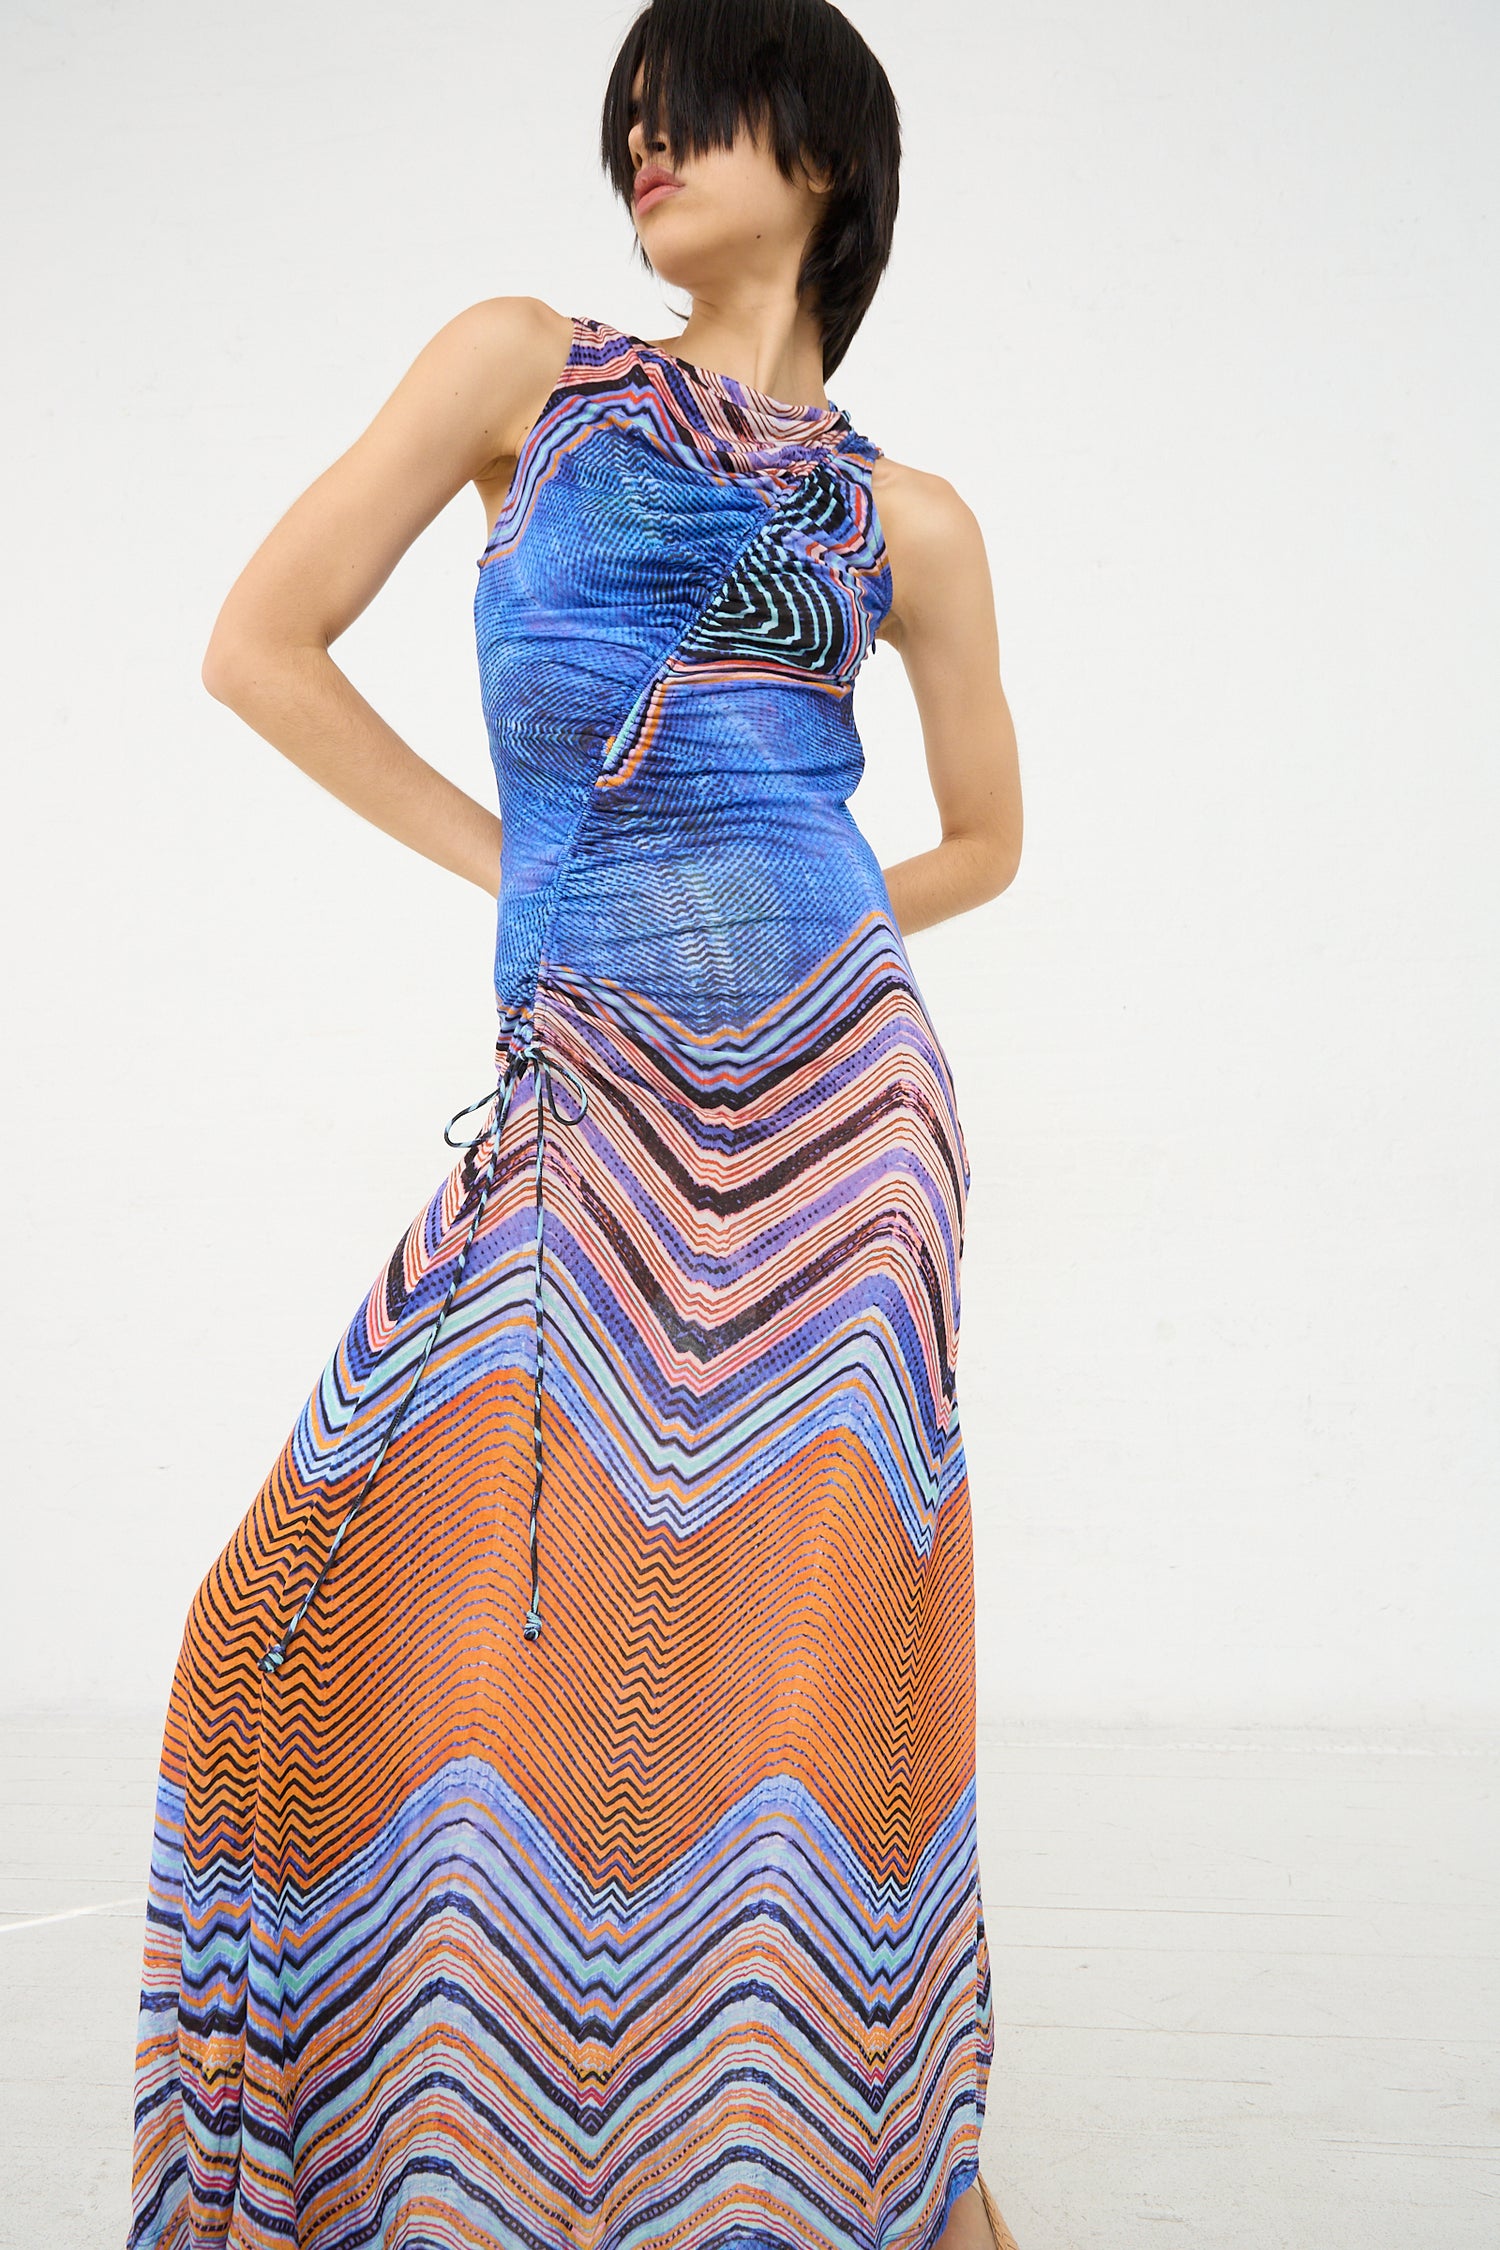 Woman posing in a sleeveless, multicolored zigzag patterned Ulla Johnson Natalia Dress in Neptune against a white background.